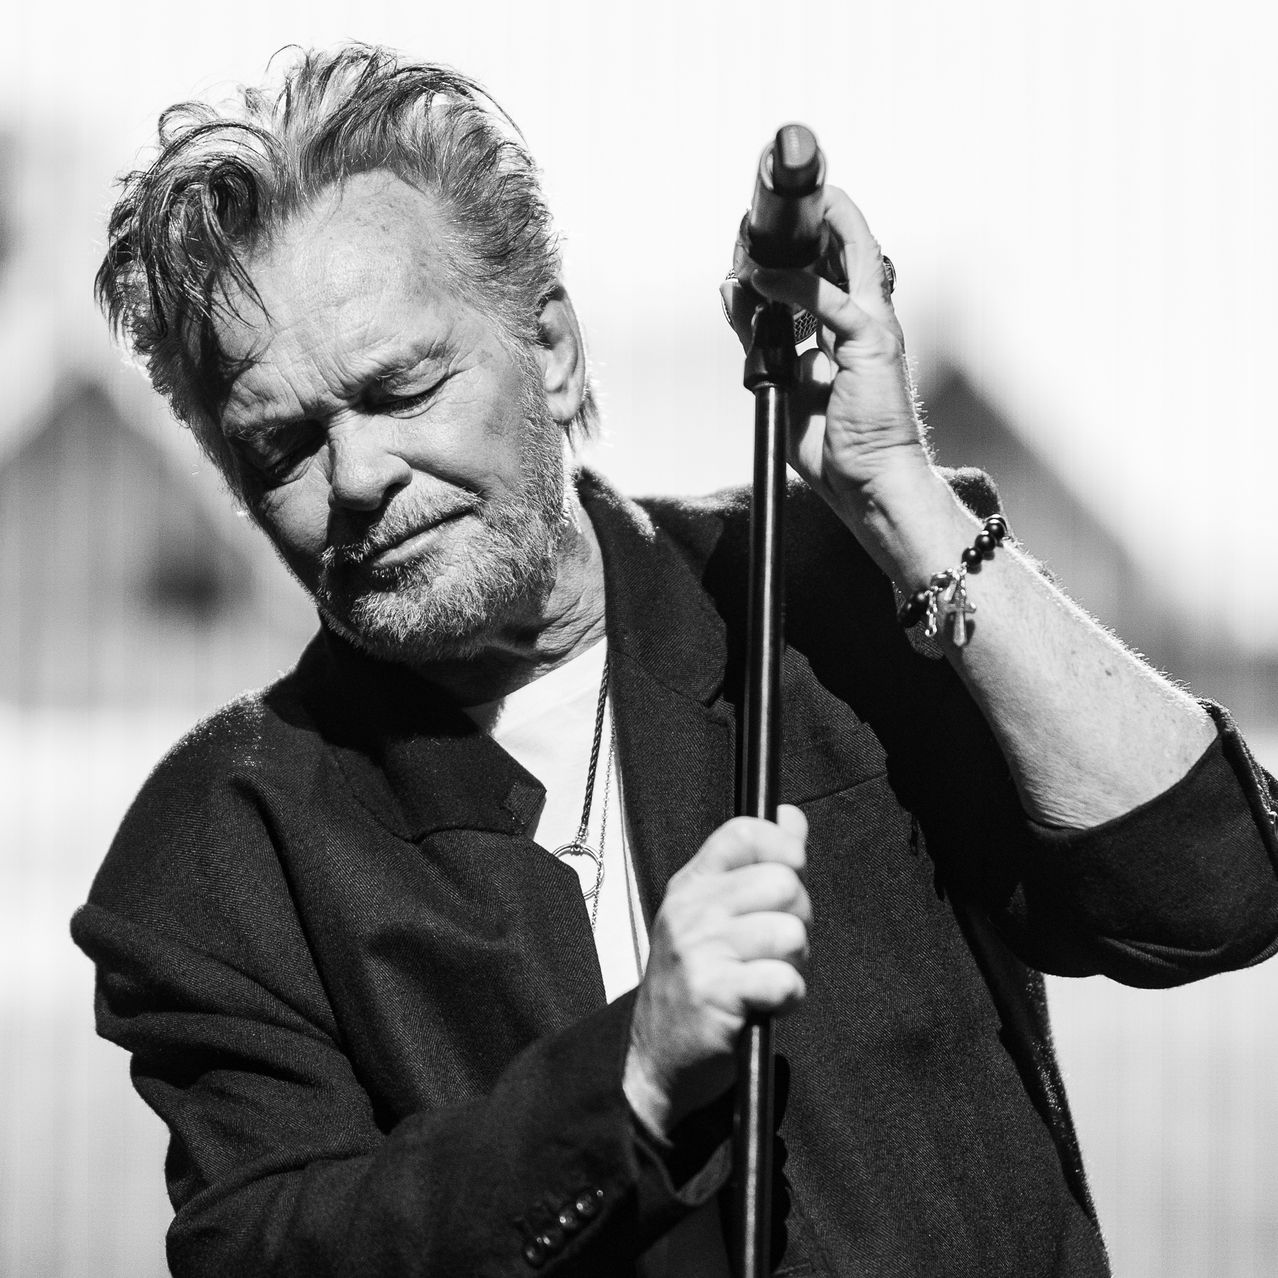 John Mellencamp Wants to Make Great Albums, Not Hit Songs